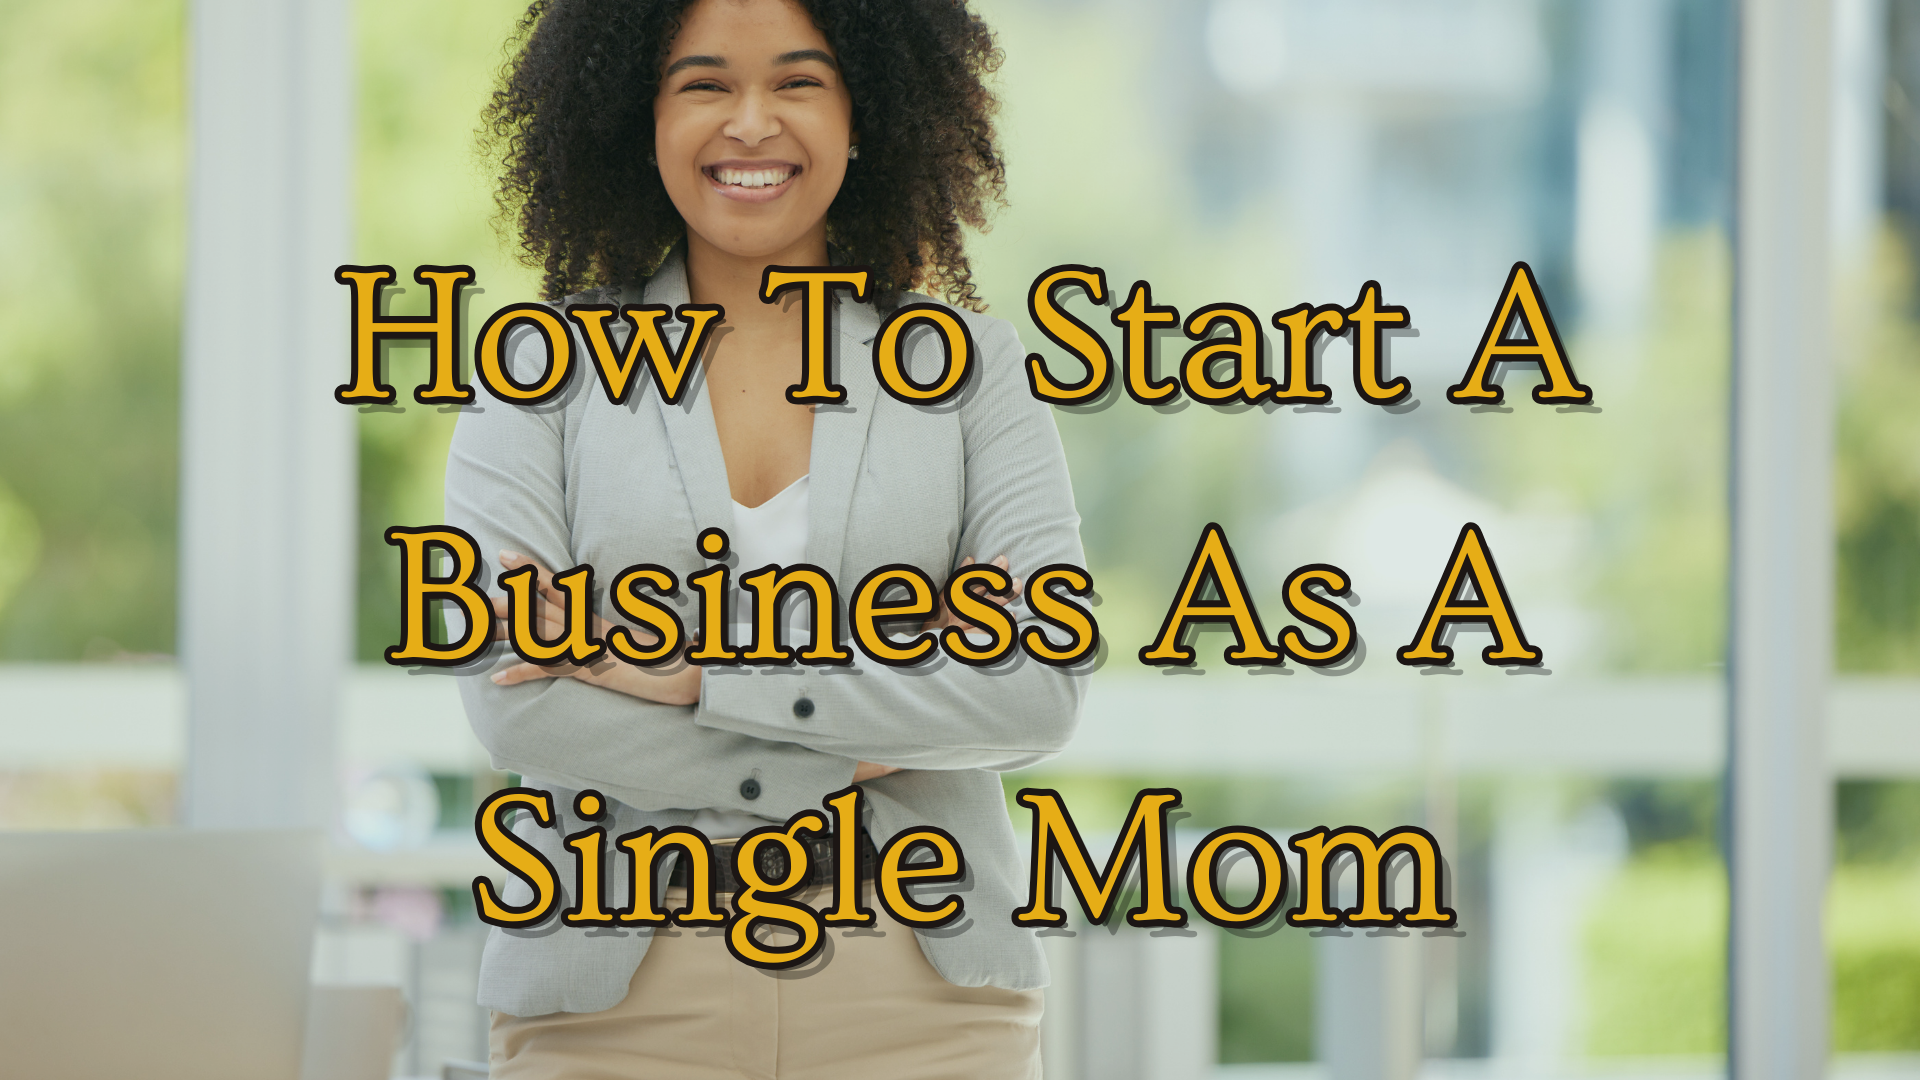 How I Started My Single Mom Business: Free Business Plan Template